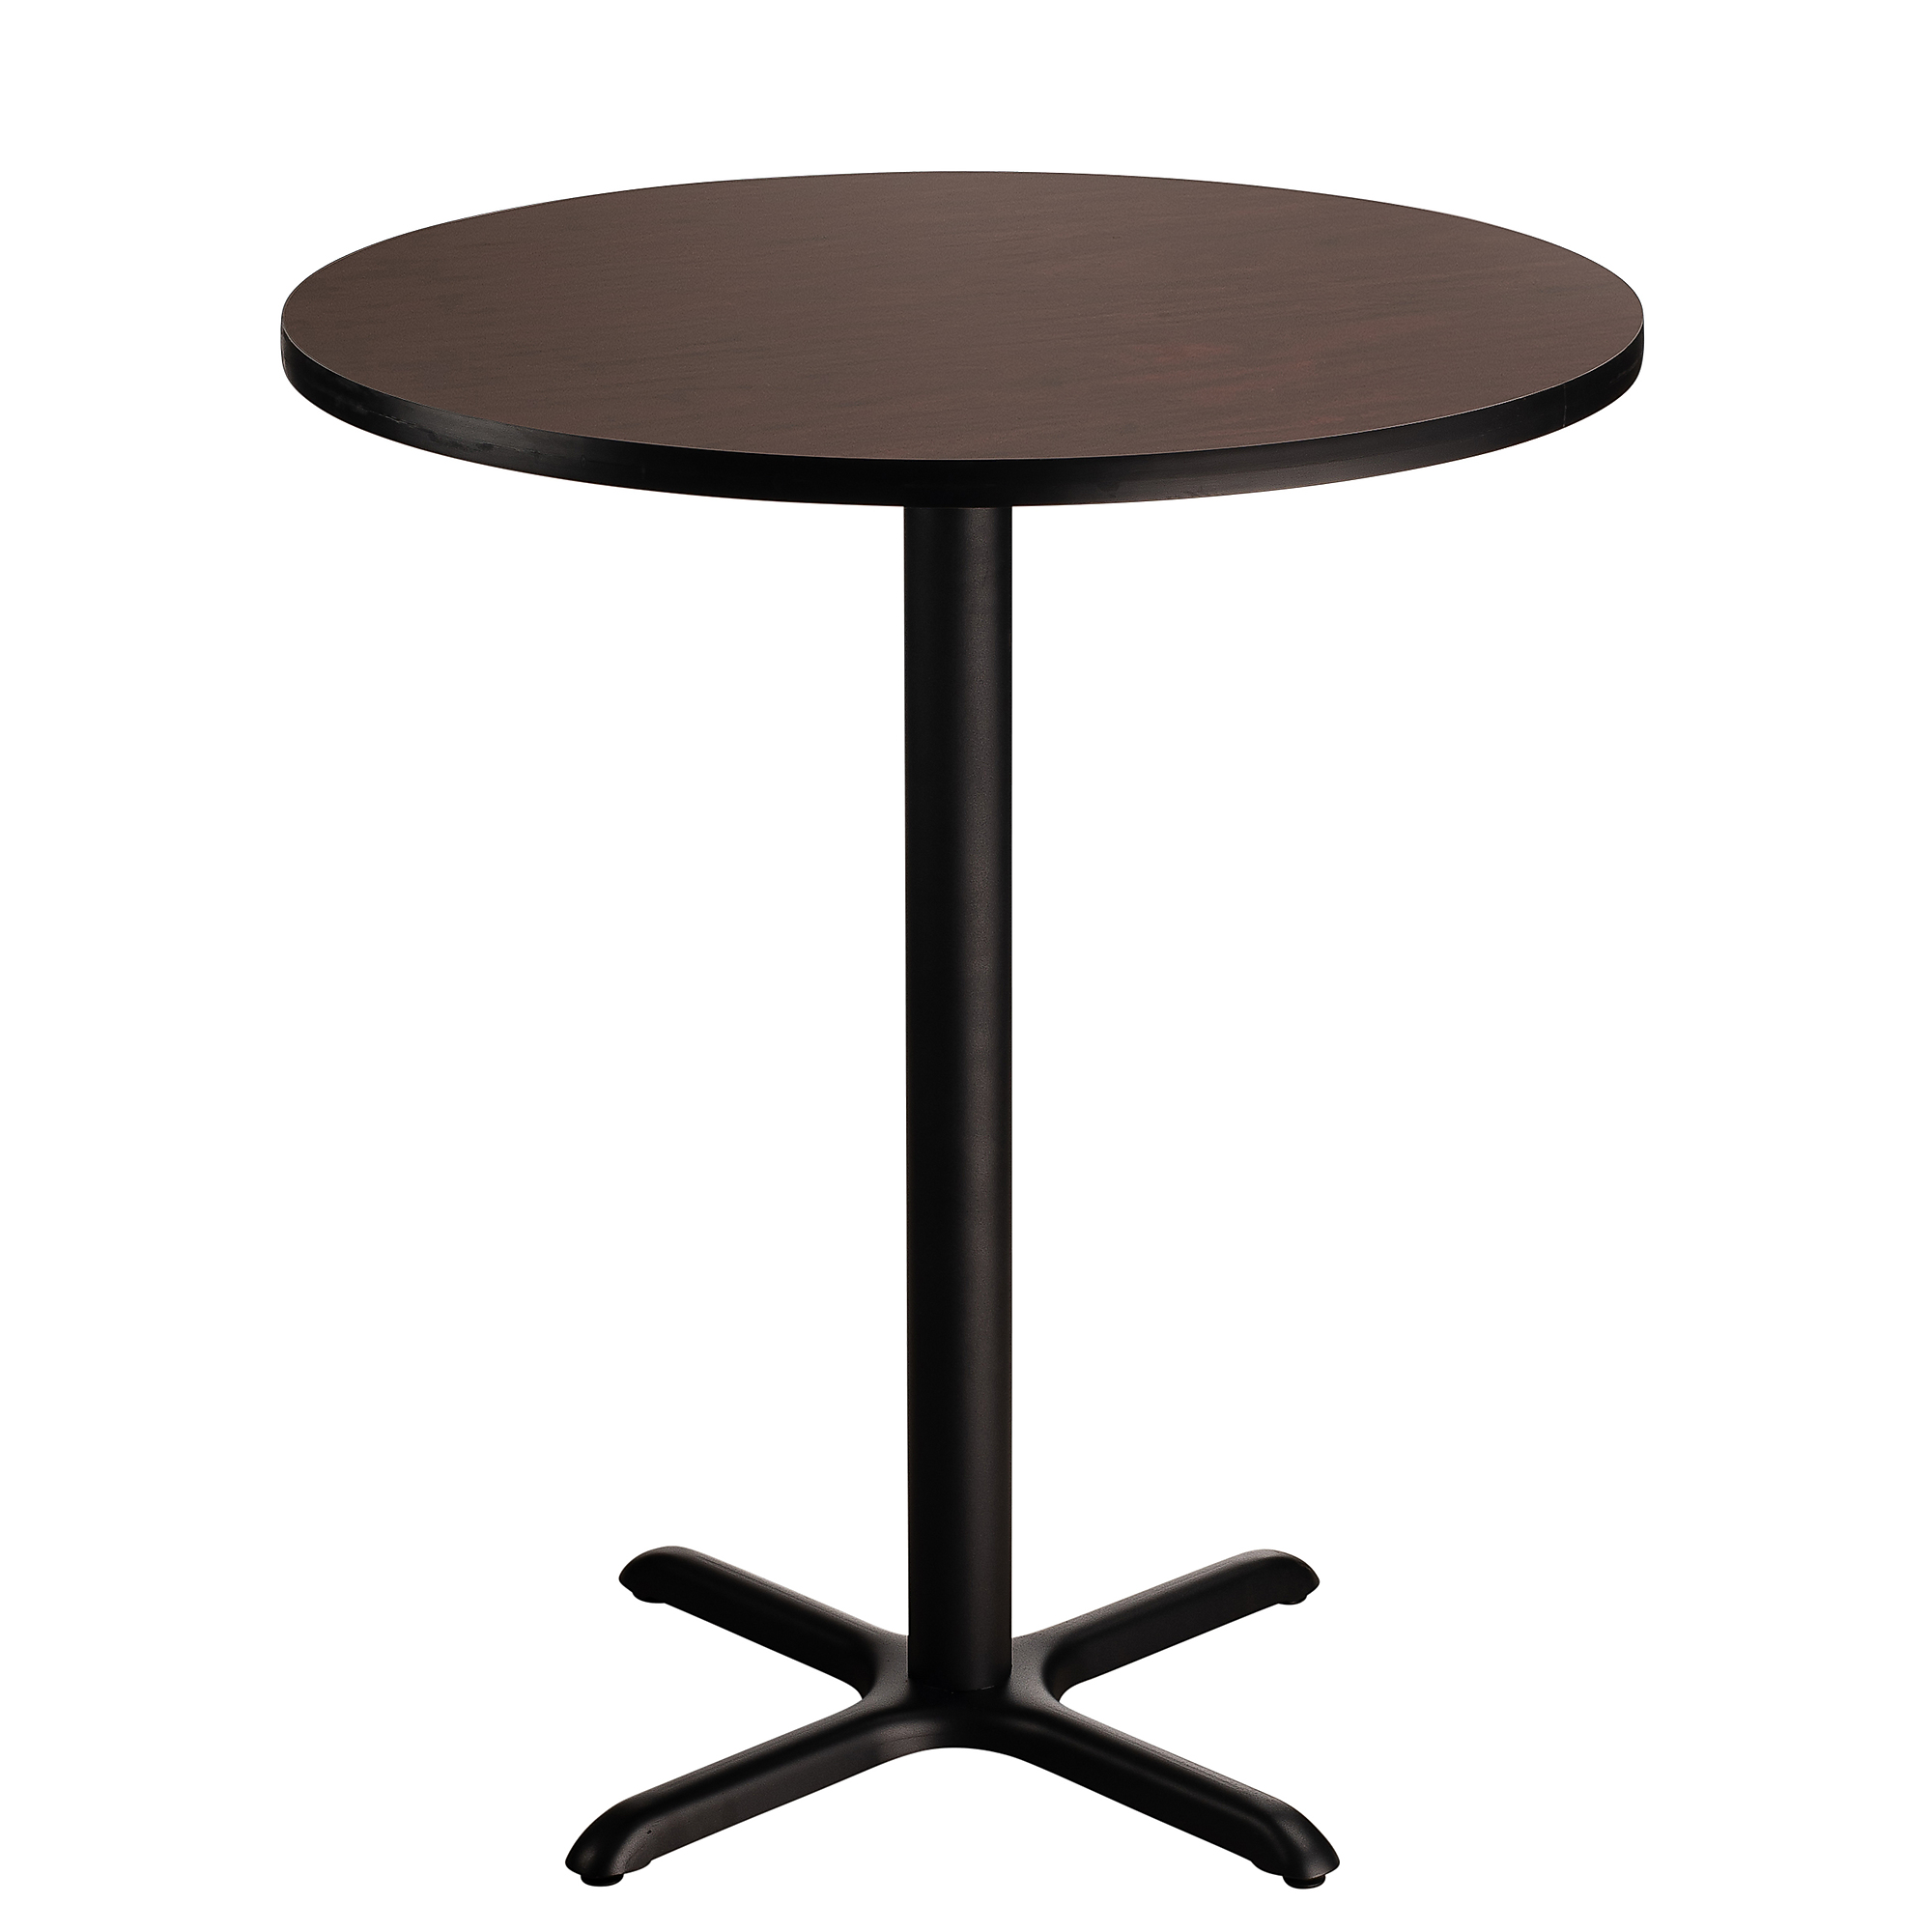 "National Public Seating, Cafe Table, 36x36x42 Round ""X"" Base, Height 42 in, Model CT13636XBPBTMMY"